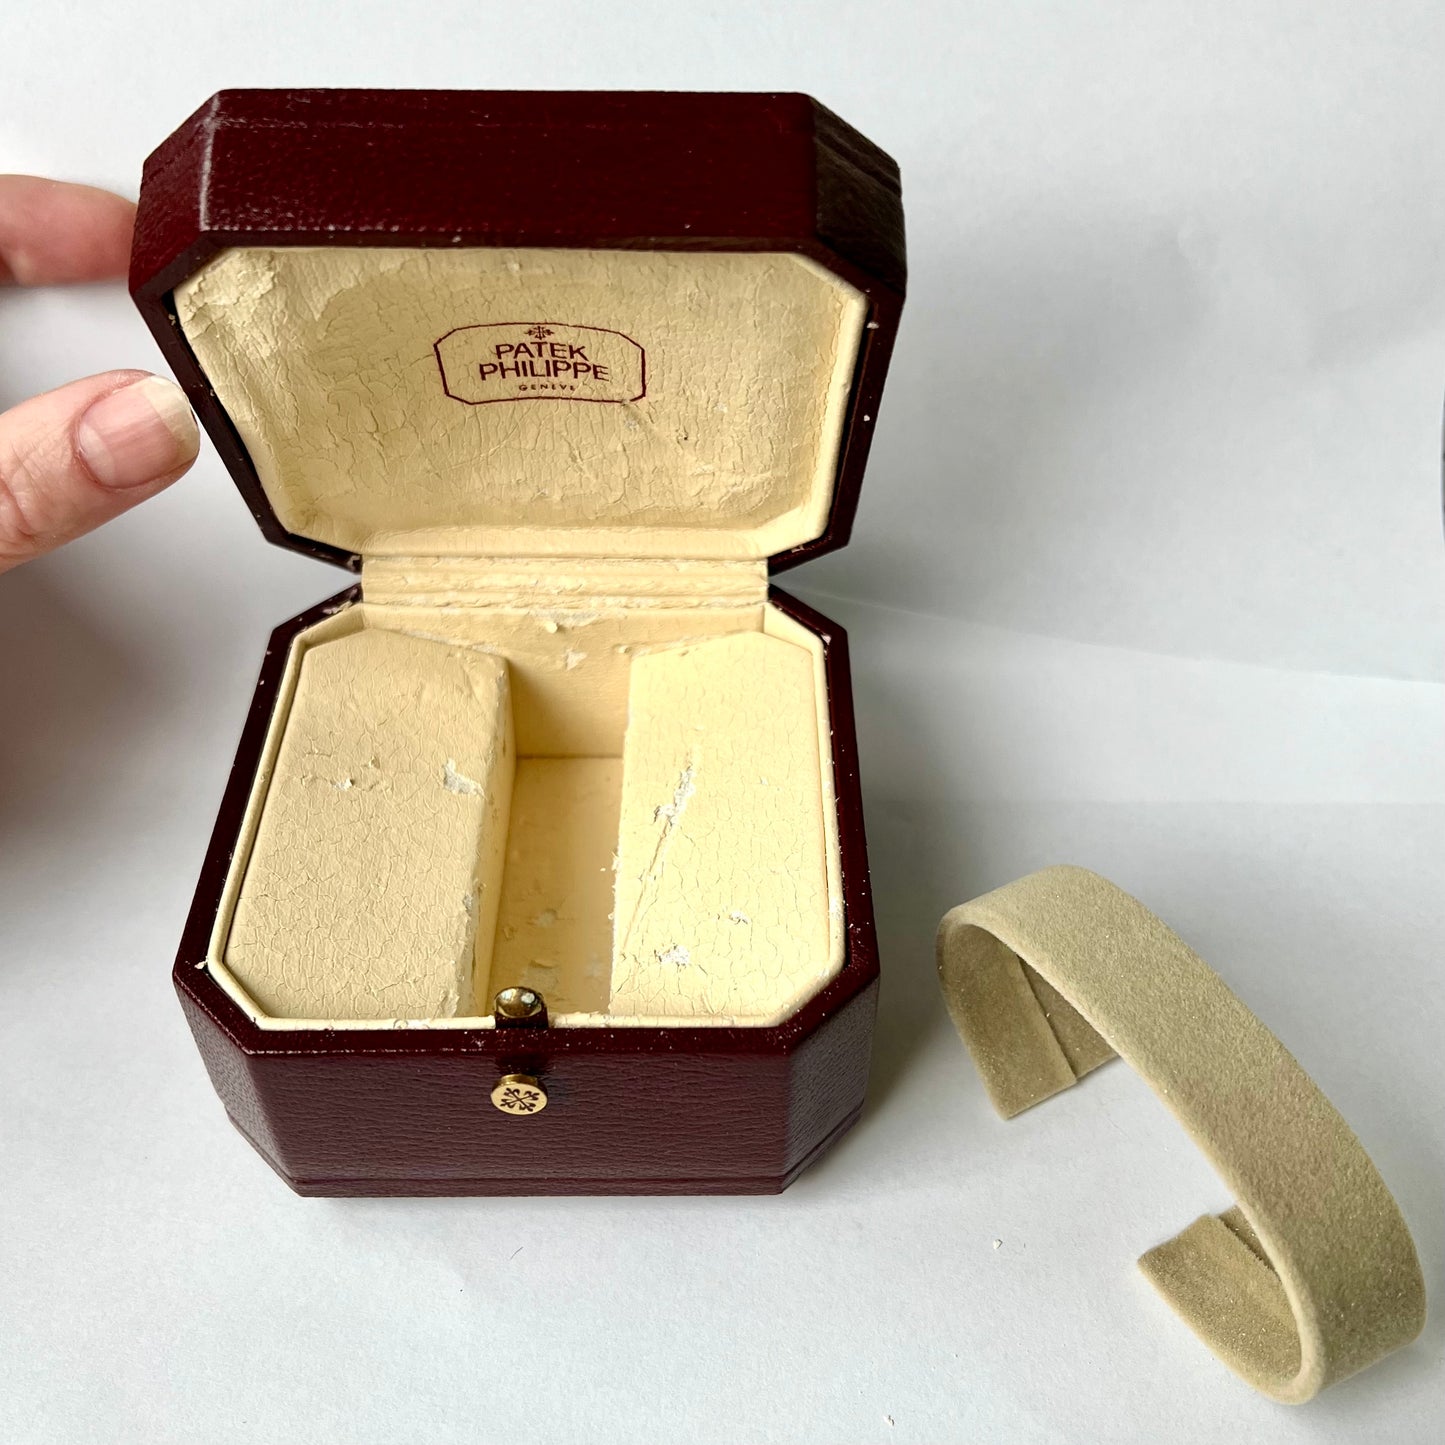 PATEK PHILIPPE Box + Outer Box 4.20x4.20x2.90 inches